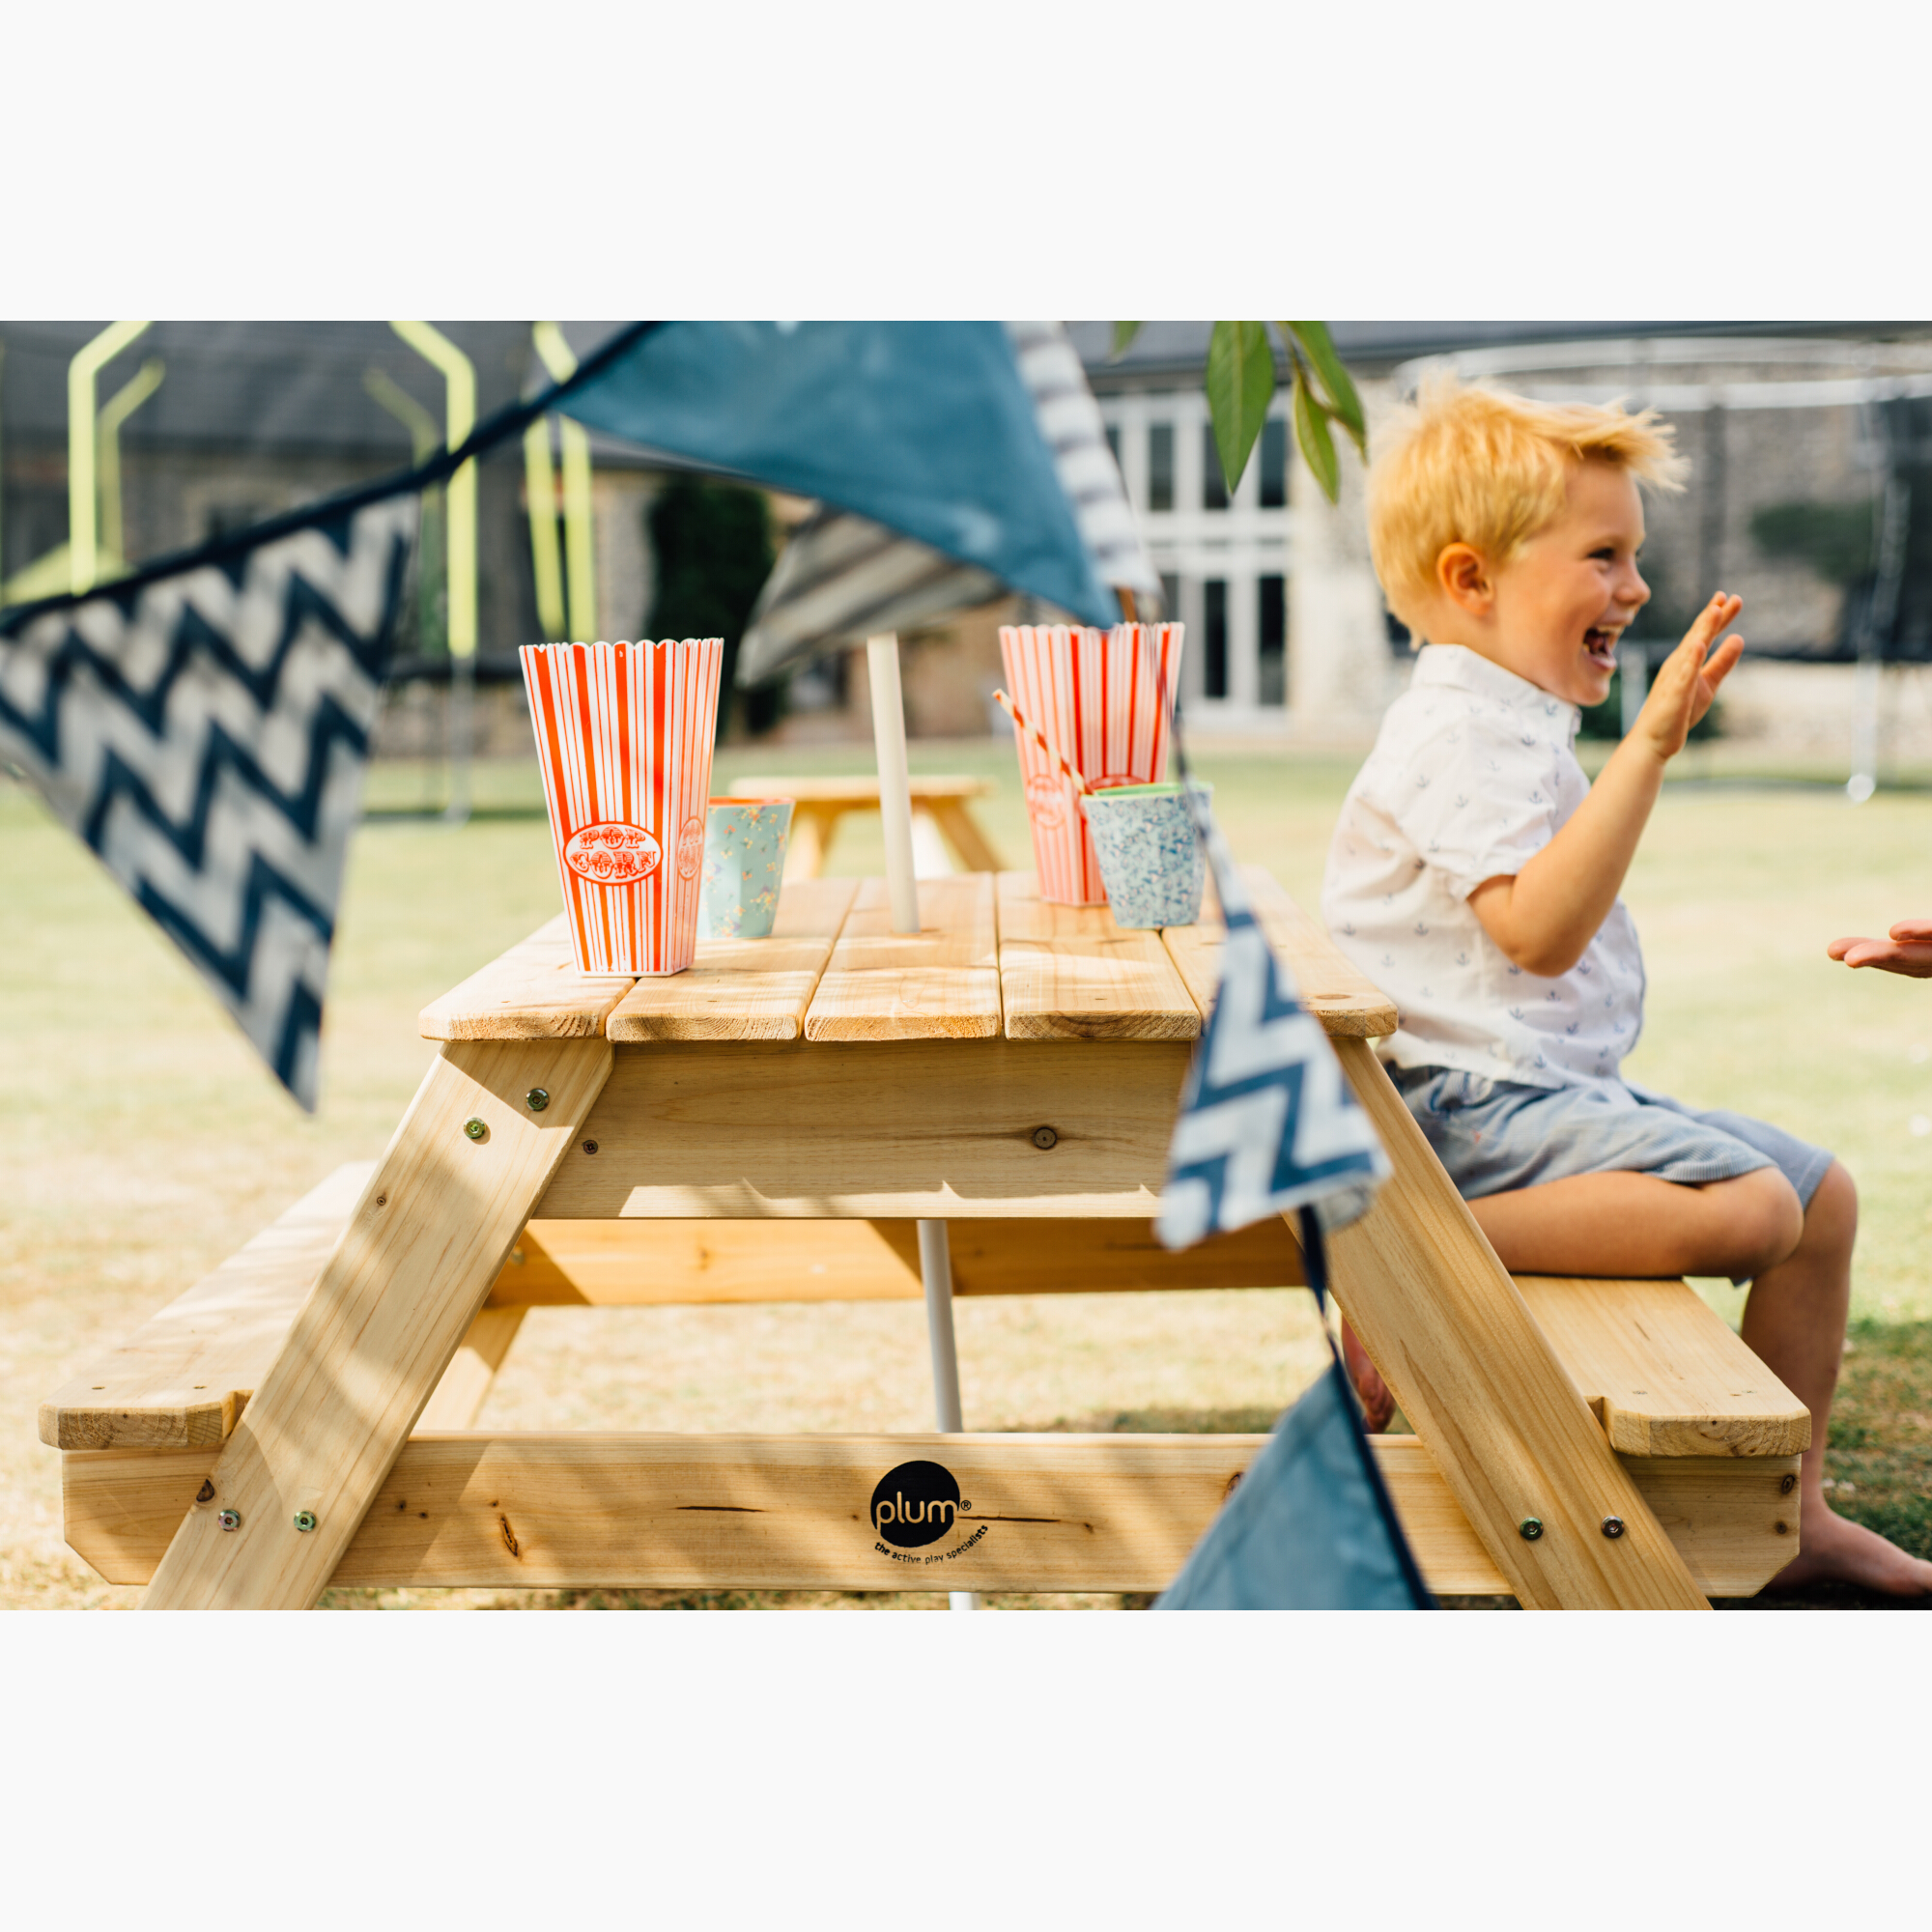 Plum Play Wooden Picnic Table with Parasol - image 4 of 6